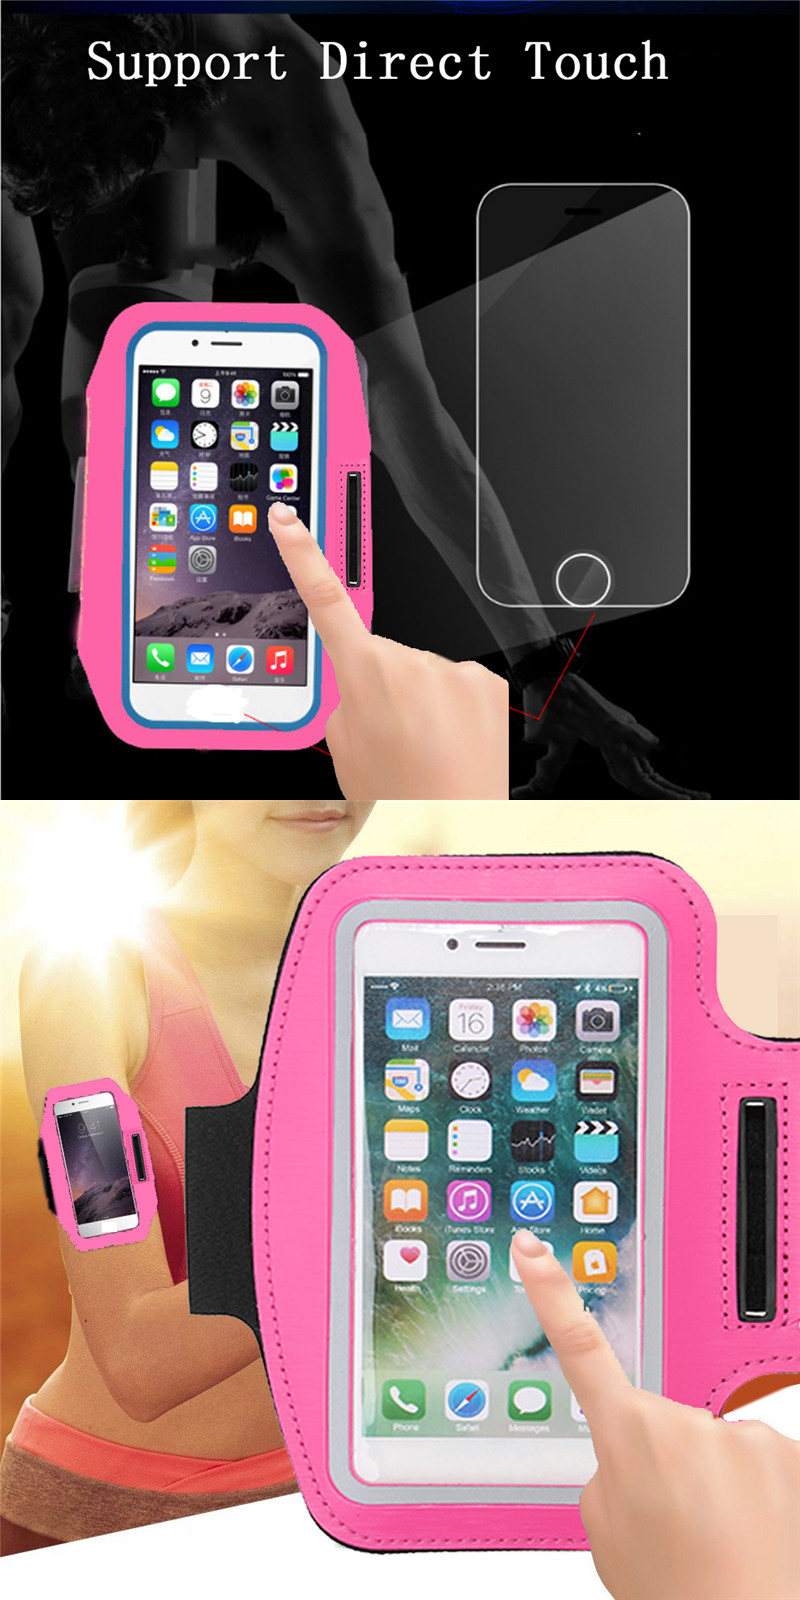 IPReereg-Waterproof-Sports-Armband-Case-Cover-Running-Gym-Touch-Screen-Holder-Pouch-for-iPhone-7-1195593-9